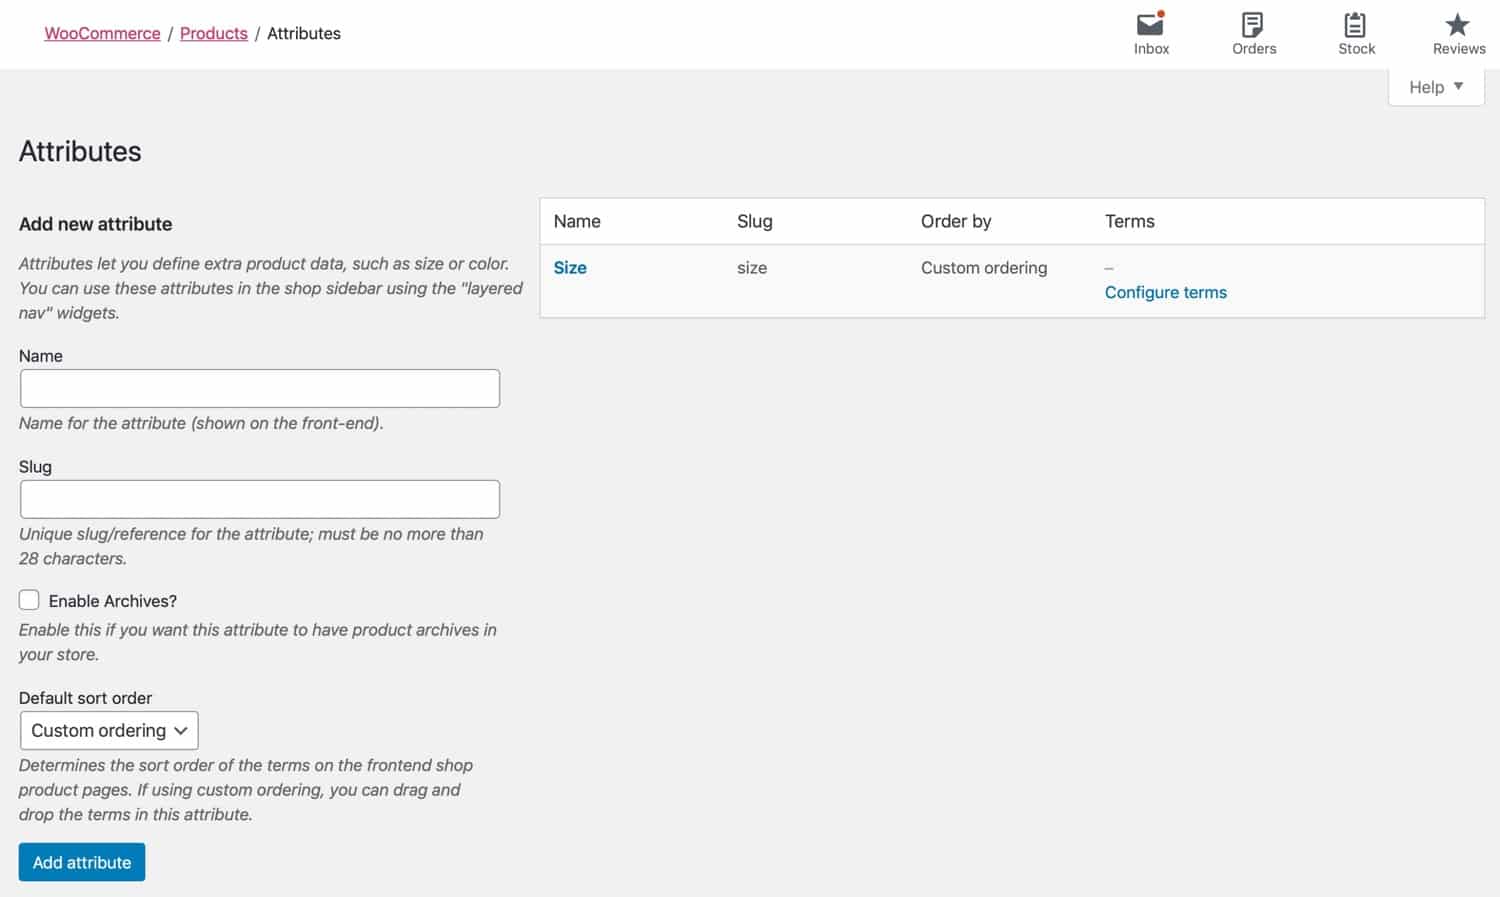 Product attributes screen